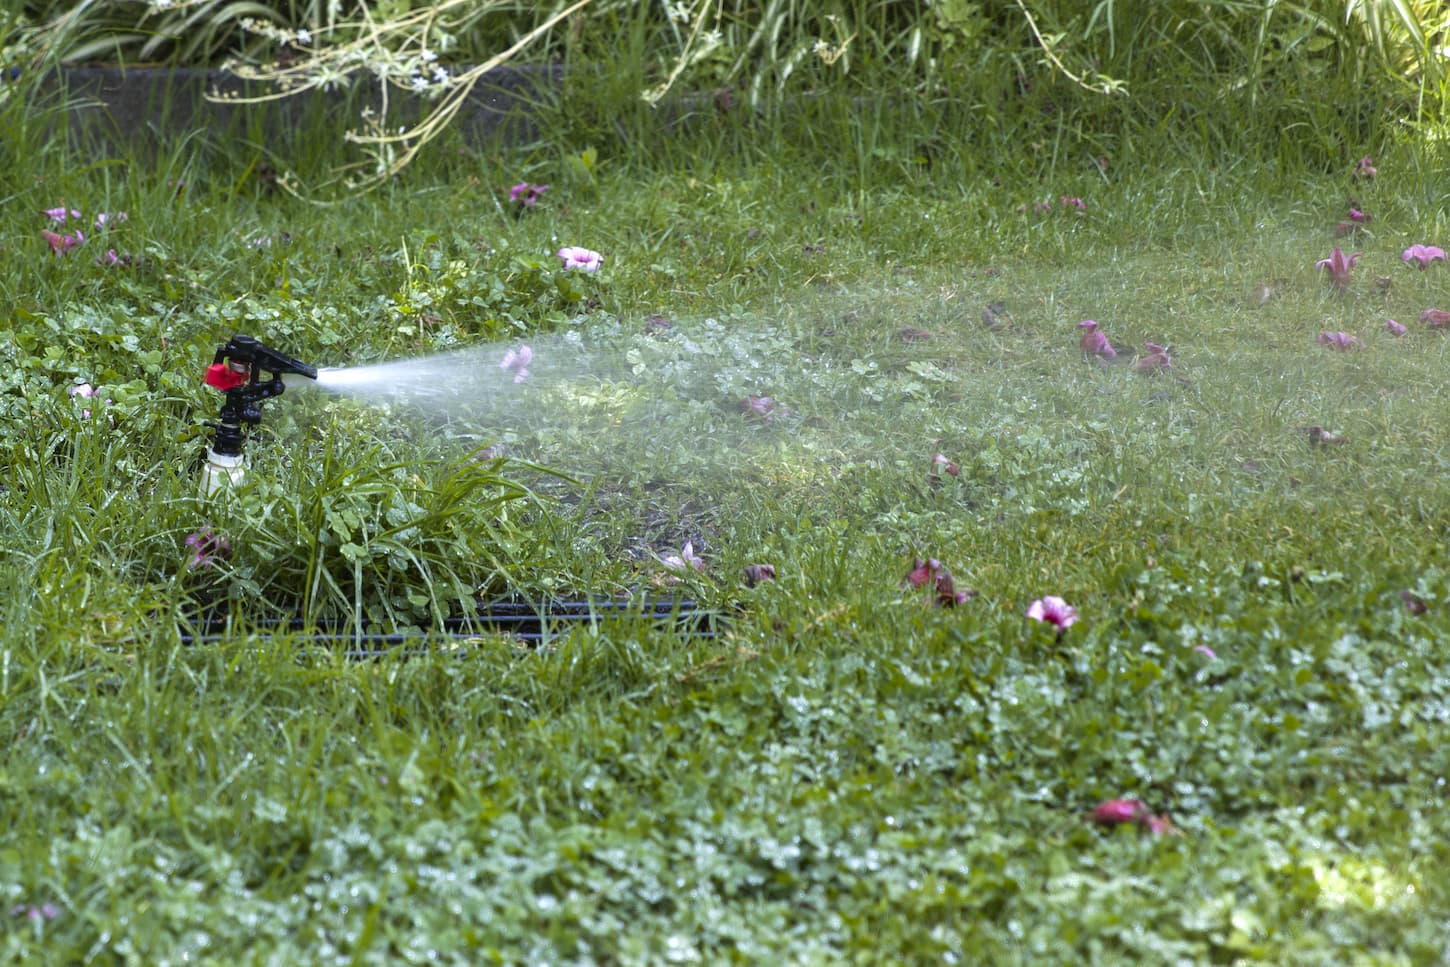 An image of a sprinkler in action in the garden.